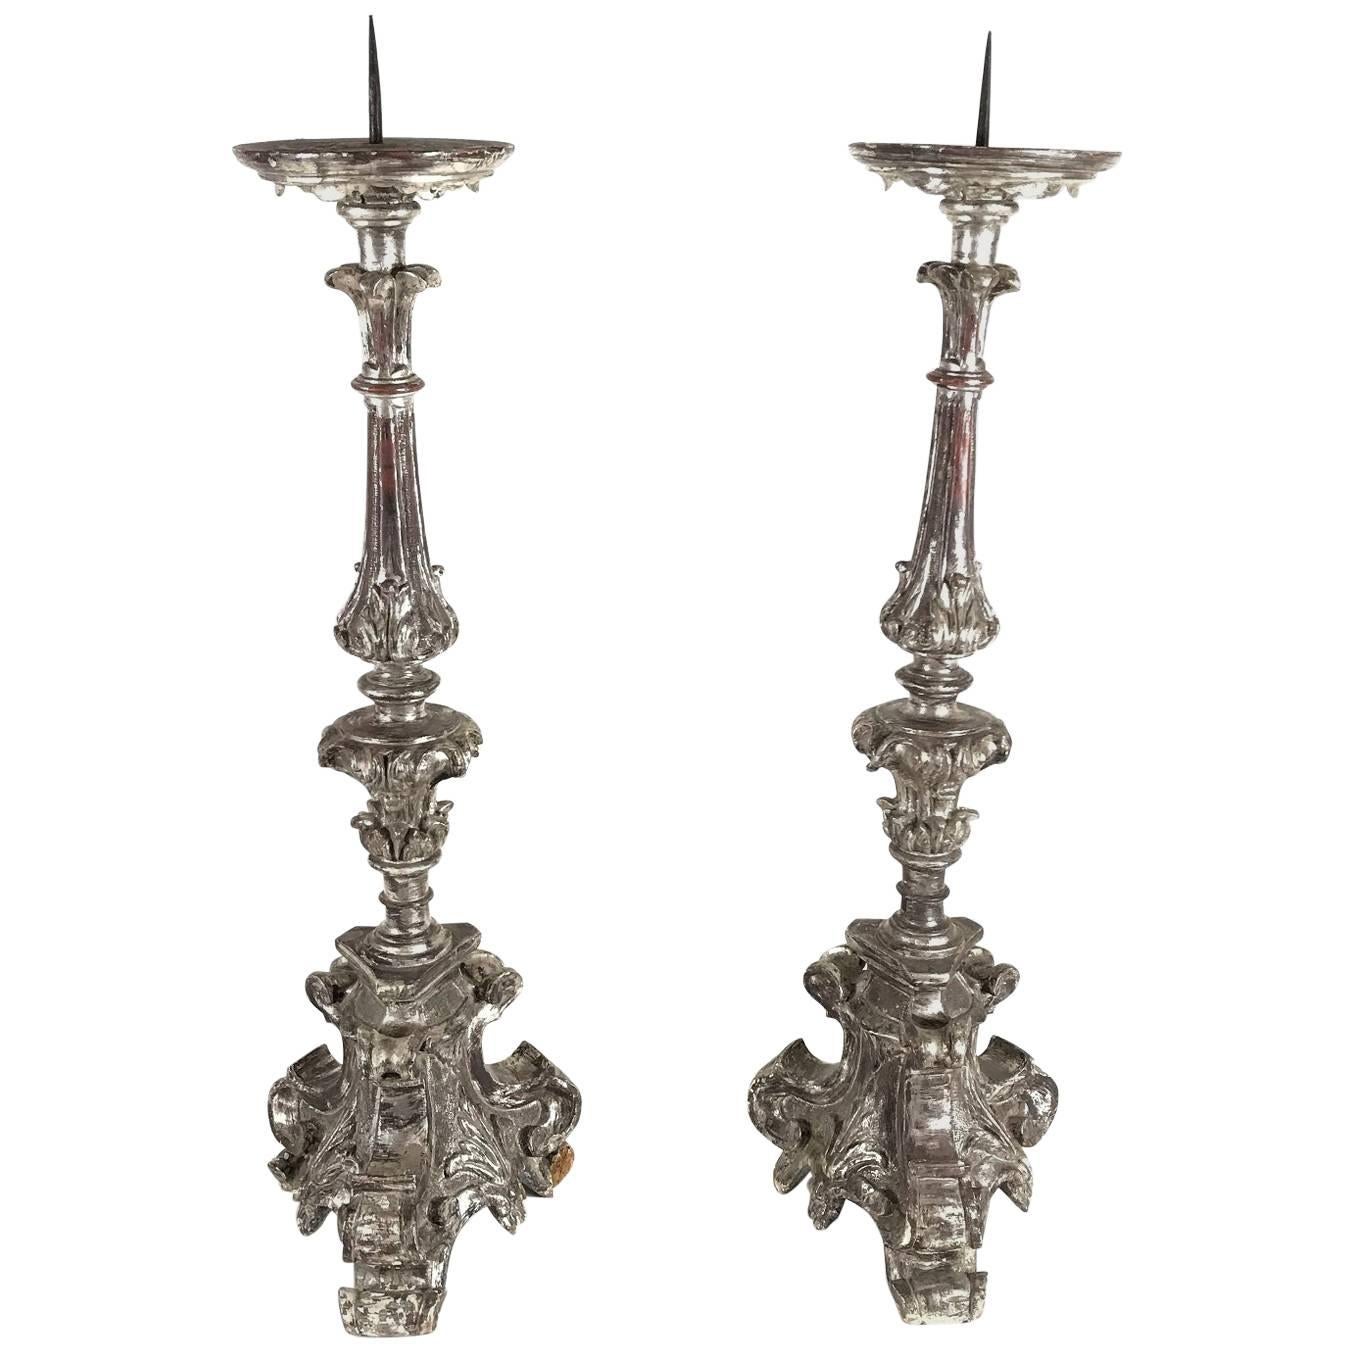 Hand-Carved Baroque Silver Giltwood Candlesticks, 17th Century Italy